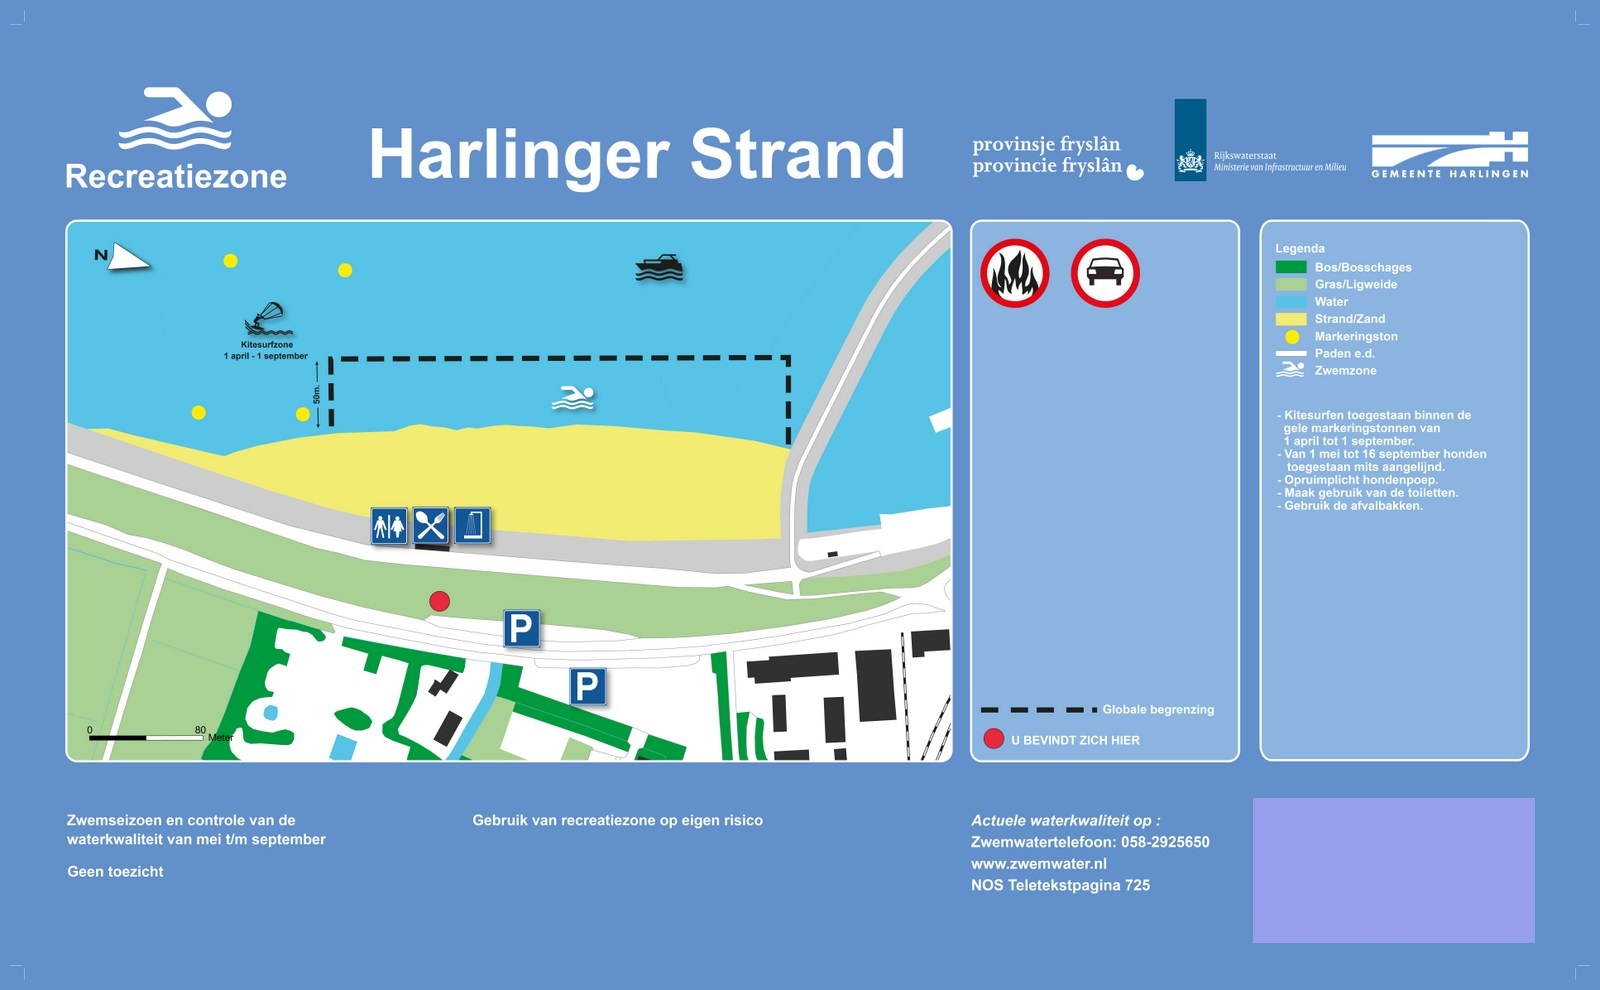 The information board at the swimming location Harlingerstrand